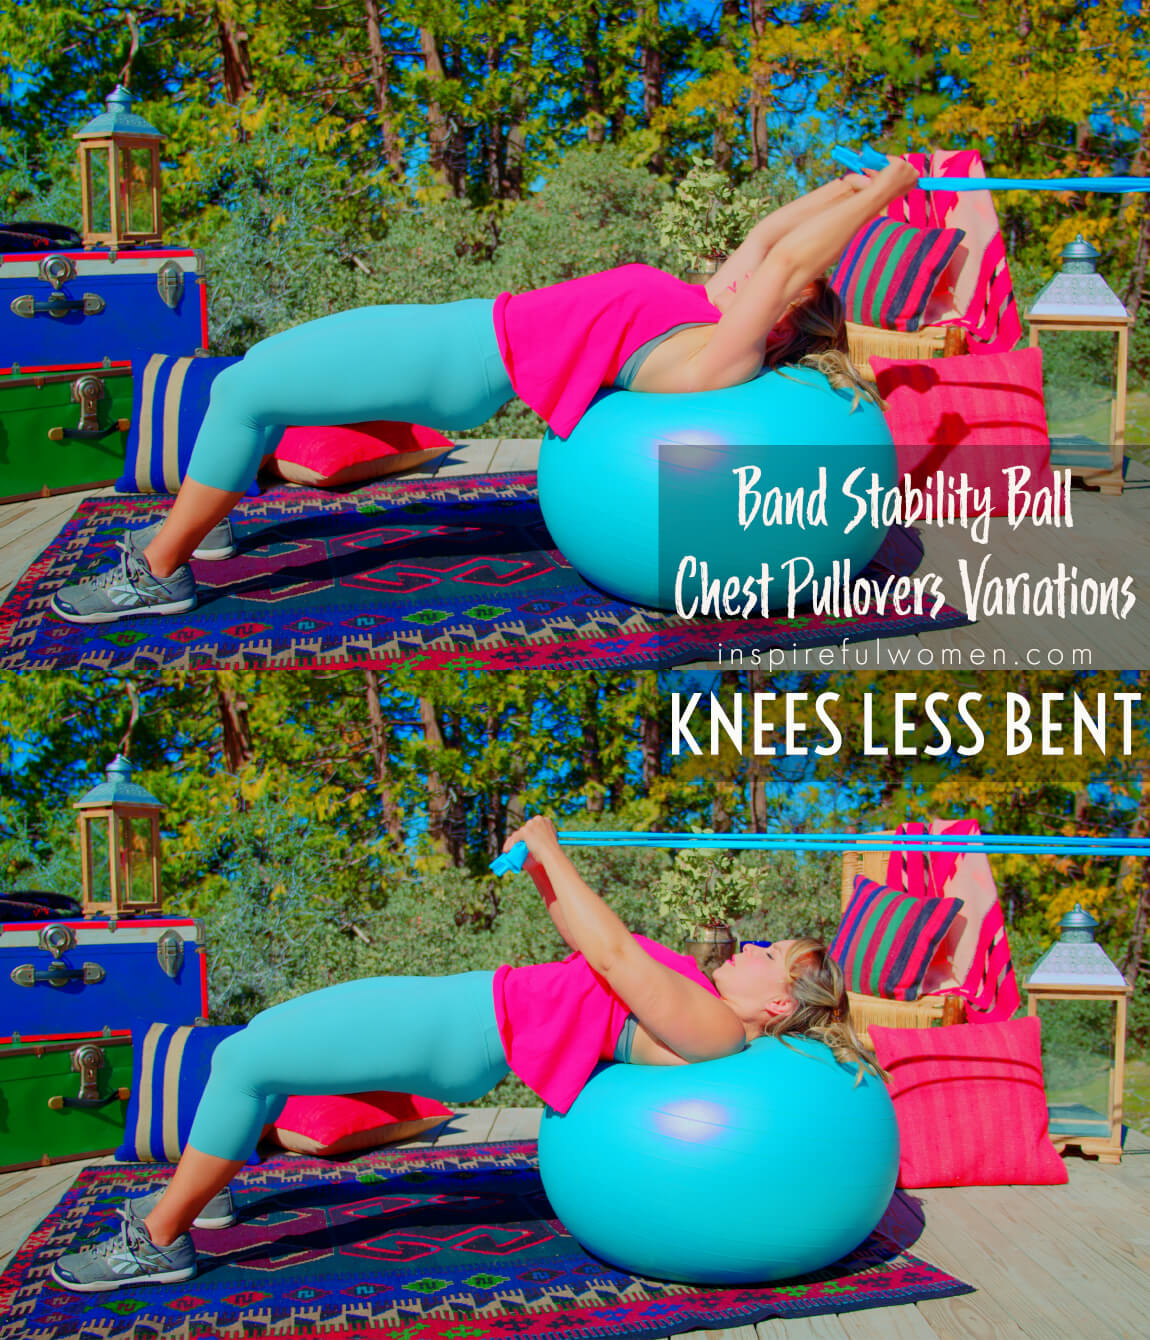 knees-less-bent-stability-ball-band-chest-pullover-variations